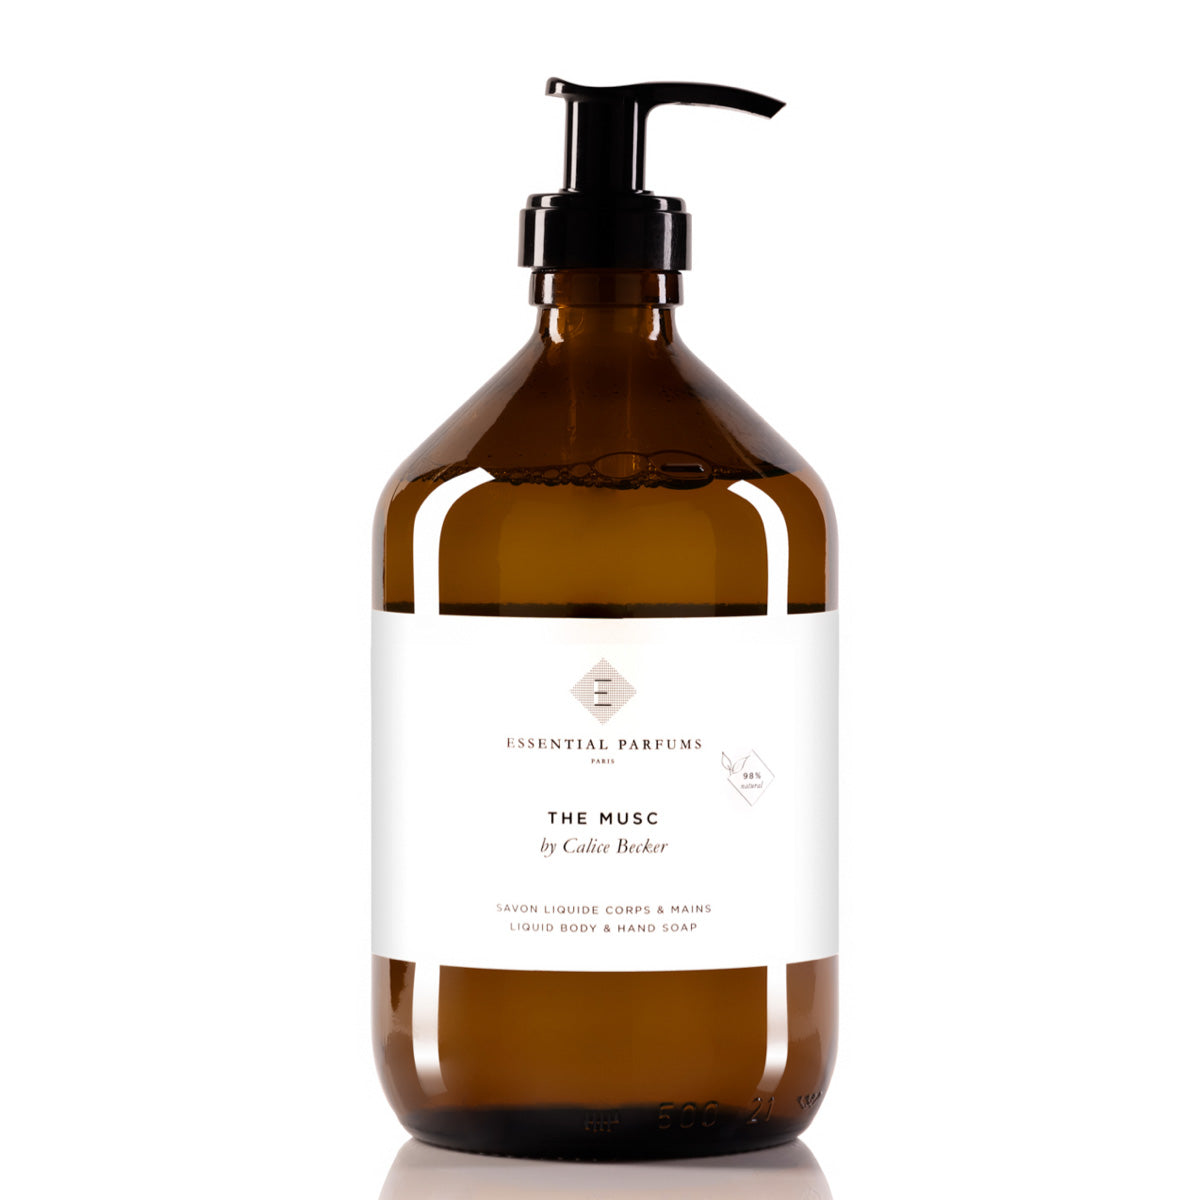 THE MUSC Hand and Body Soap by Calice Becker